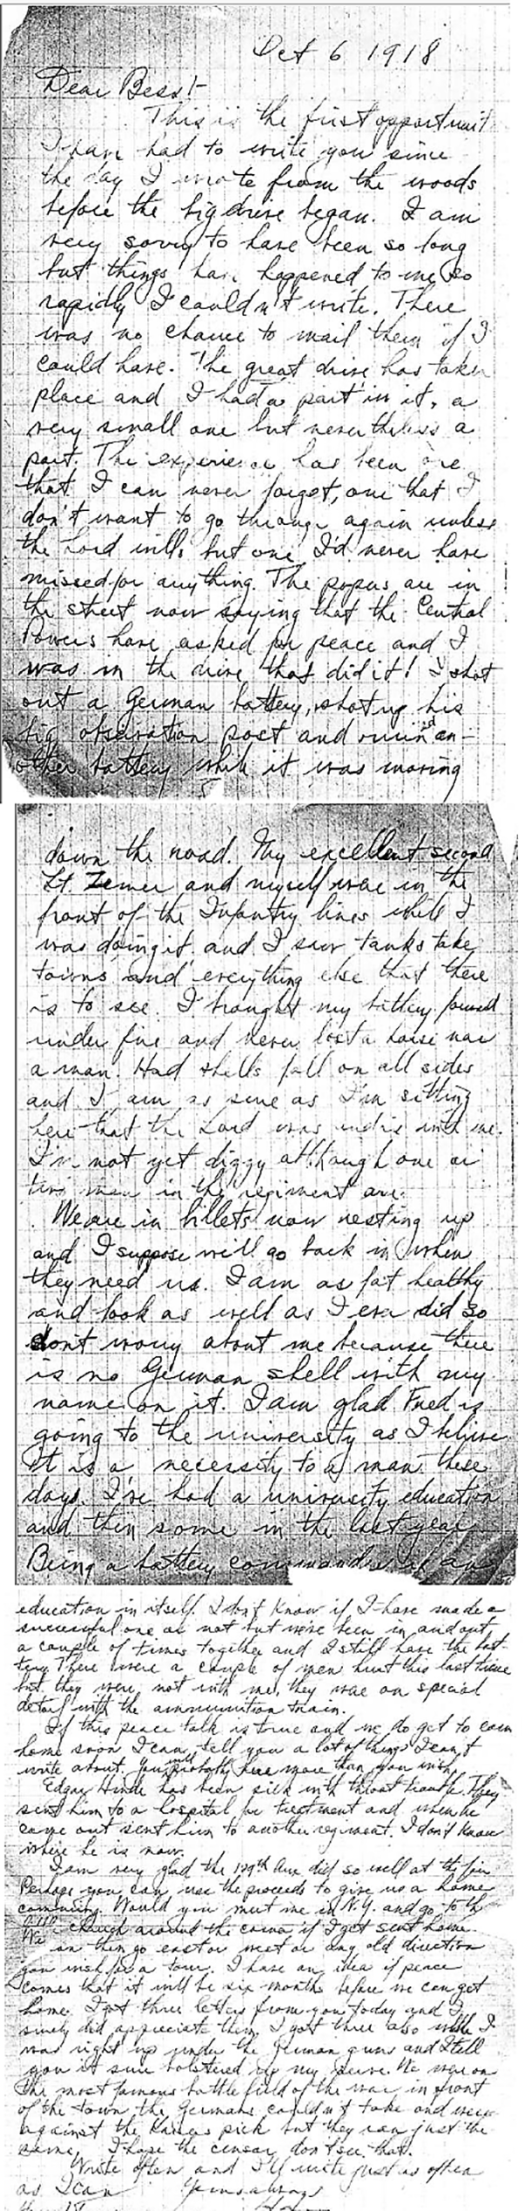 Truman Letter to Bess